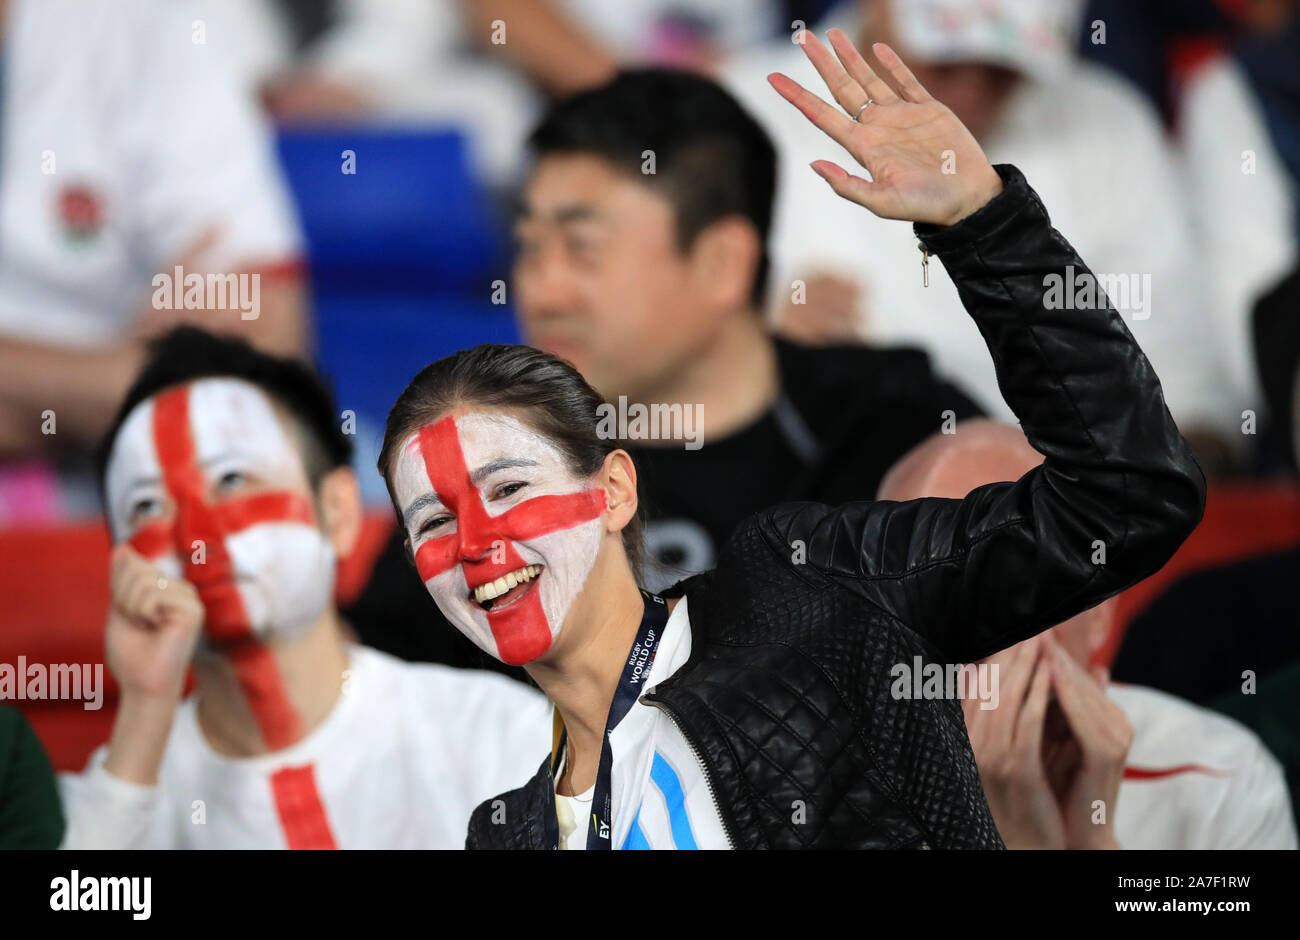 England fans show their support in the stands ahead of the 2019 Rugby World Cup final match at Yokohama Stadium. Stock Photo